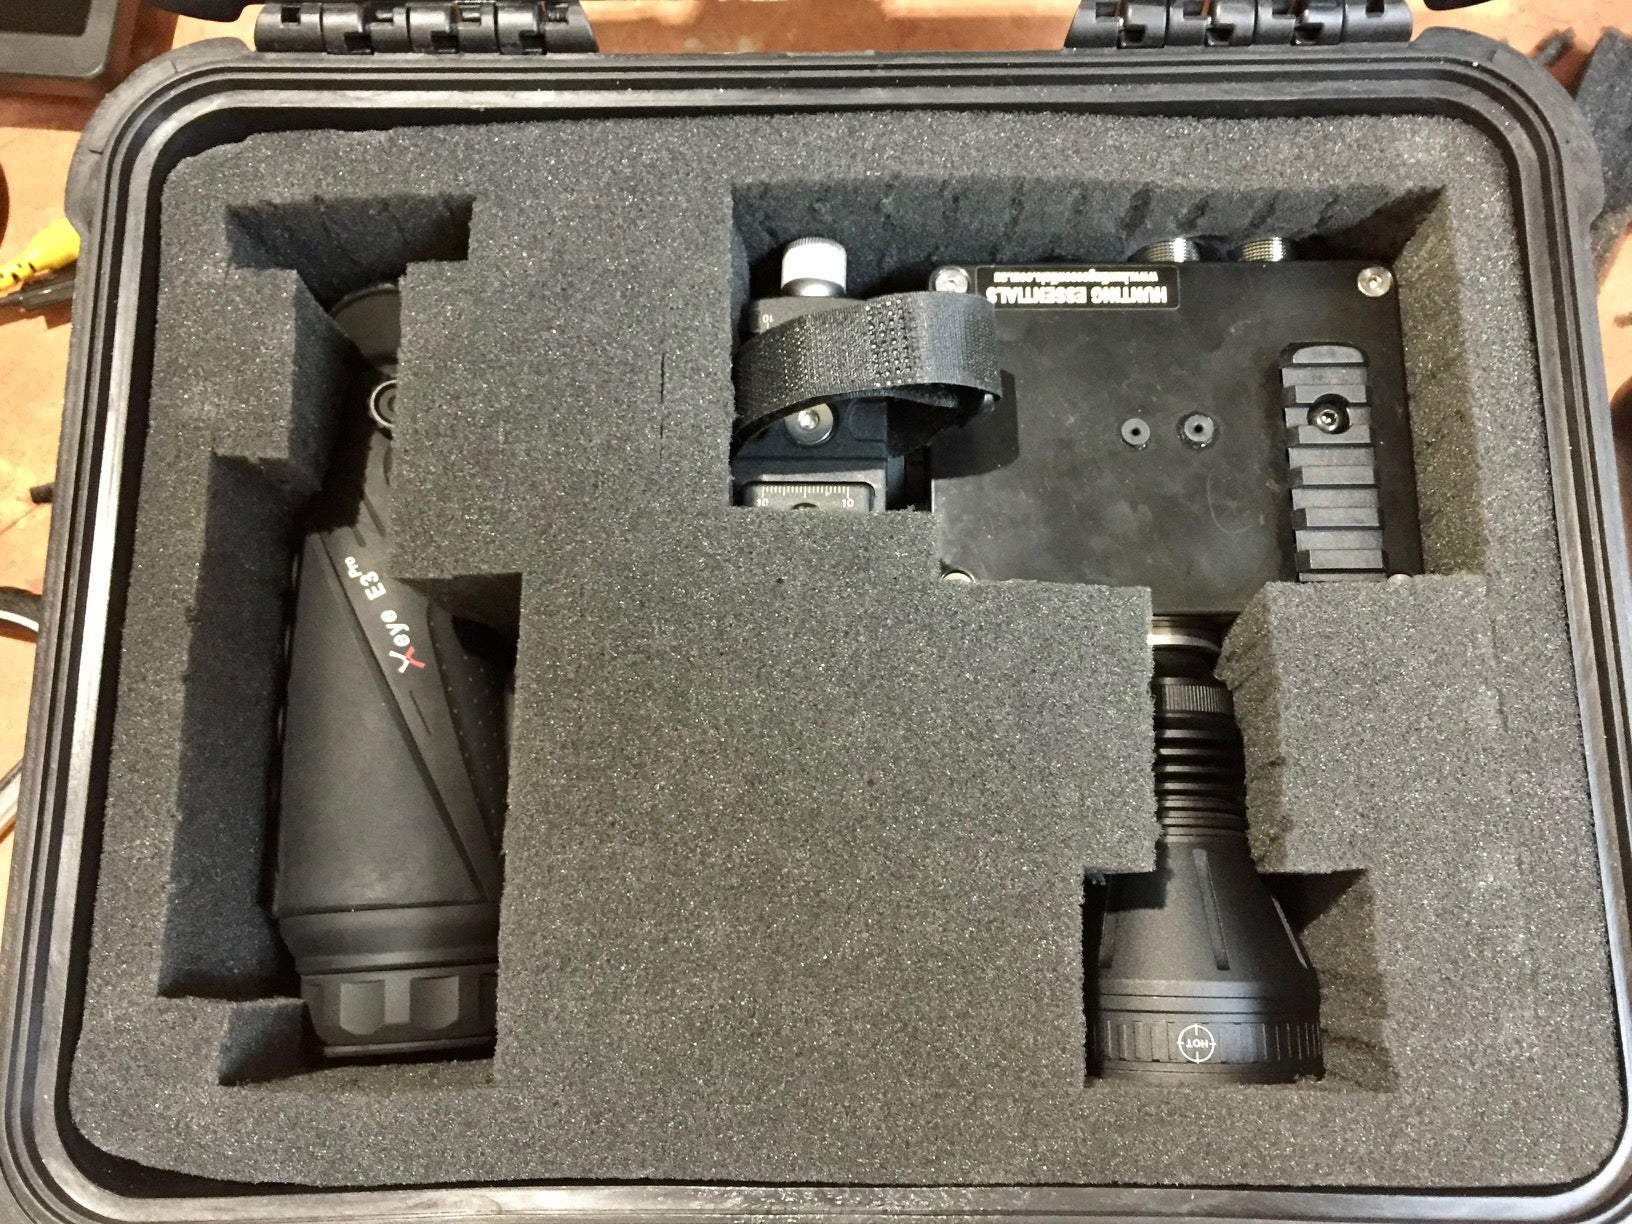 Therma-Link and Monocular Carry Care